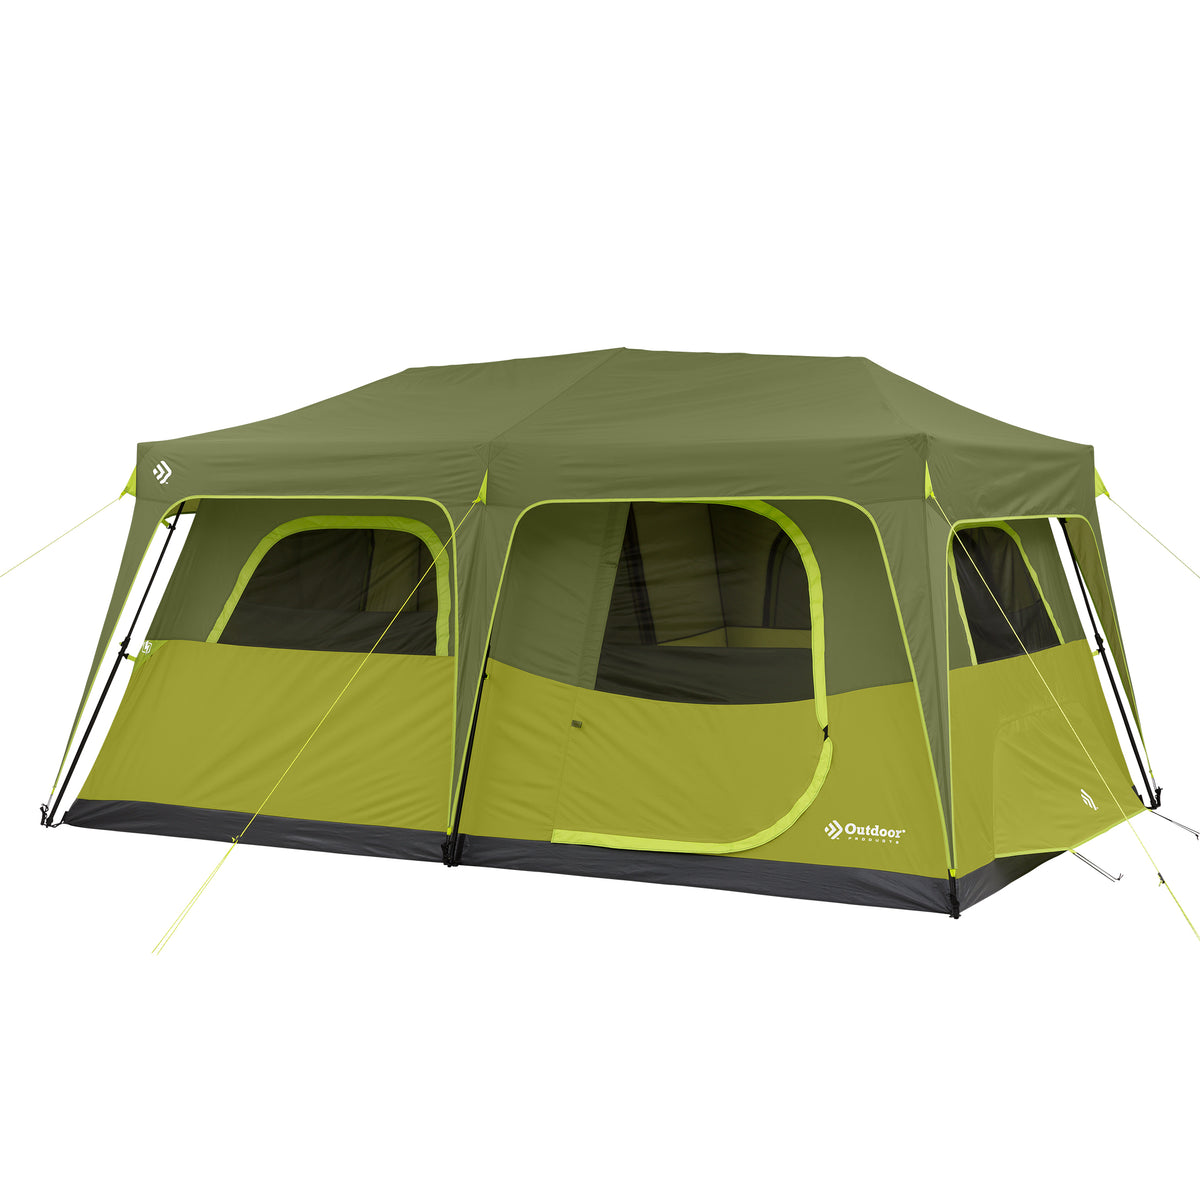 8 Person Instant Cabin Tent | Outdoor Products – Outdoor Products